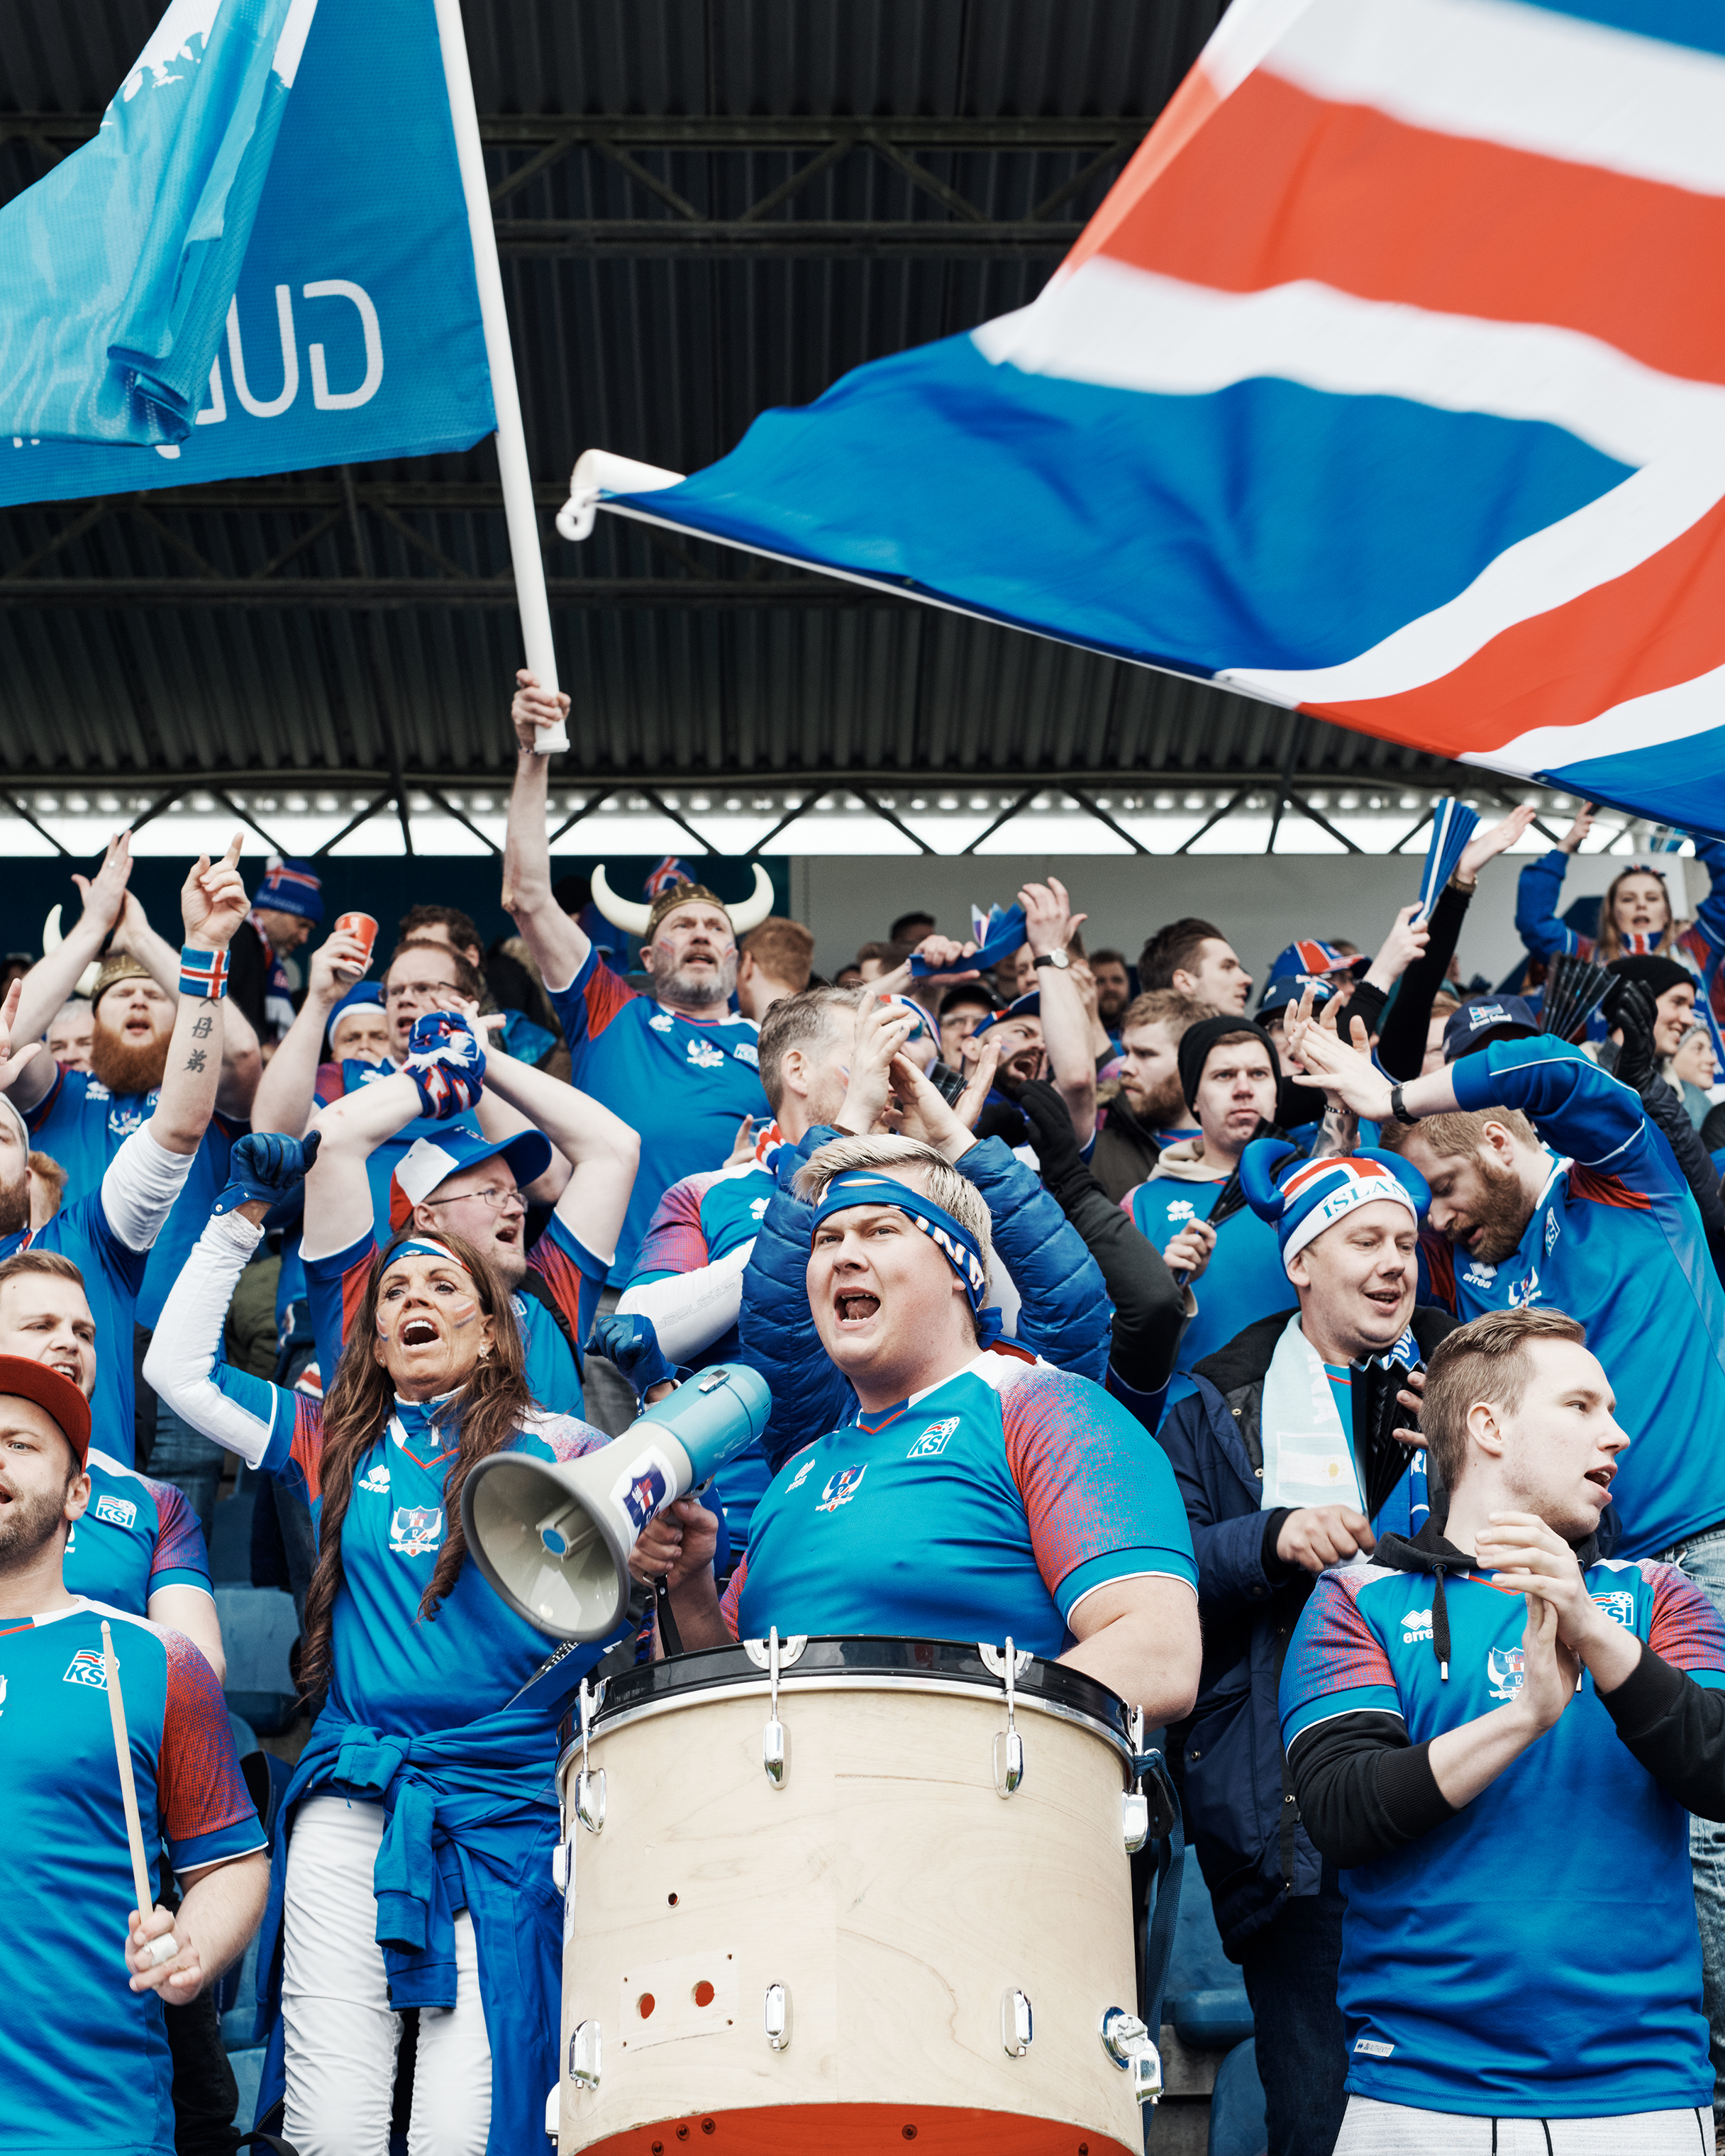 Members of Tólfan at the national stadium in Reykjavík on June 2. (Thomas Prior for TIME)